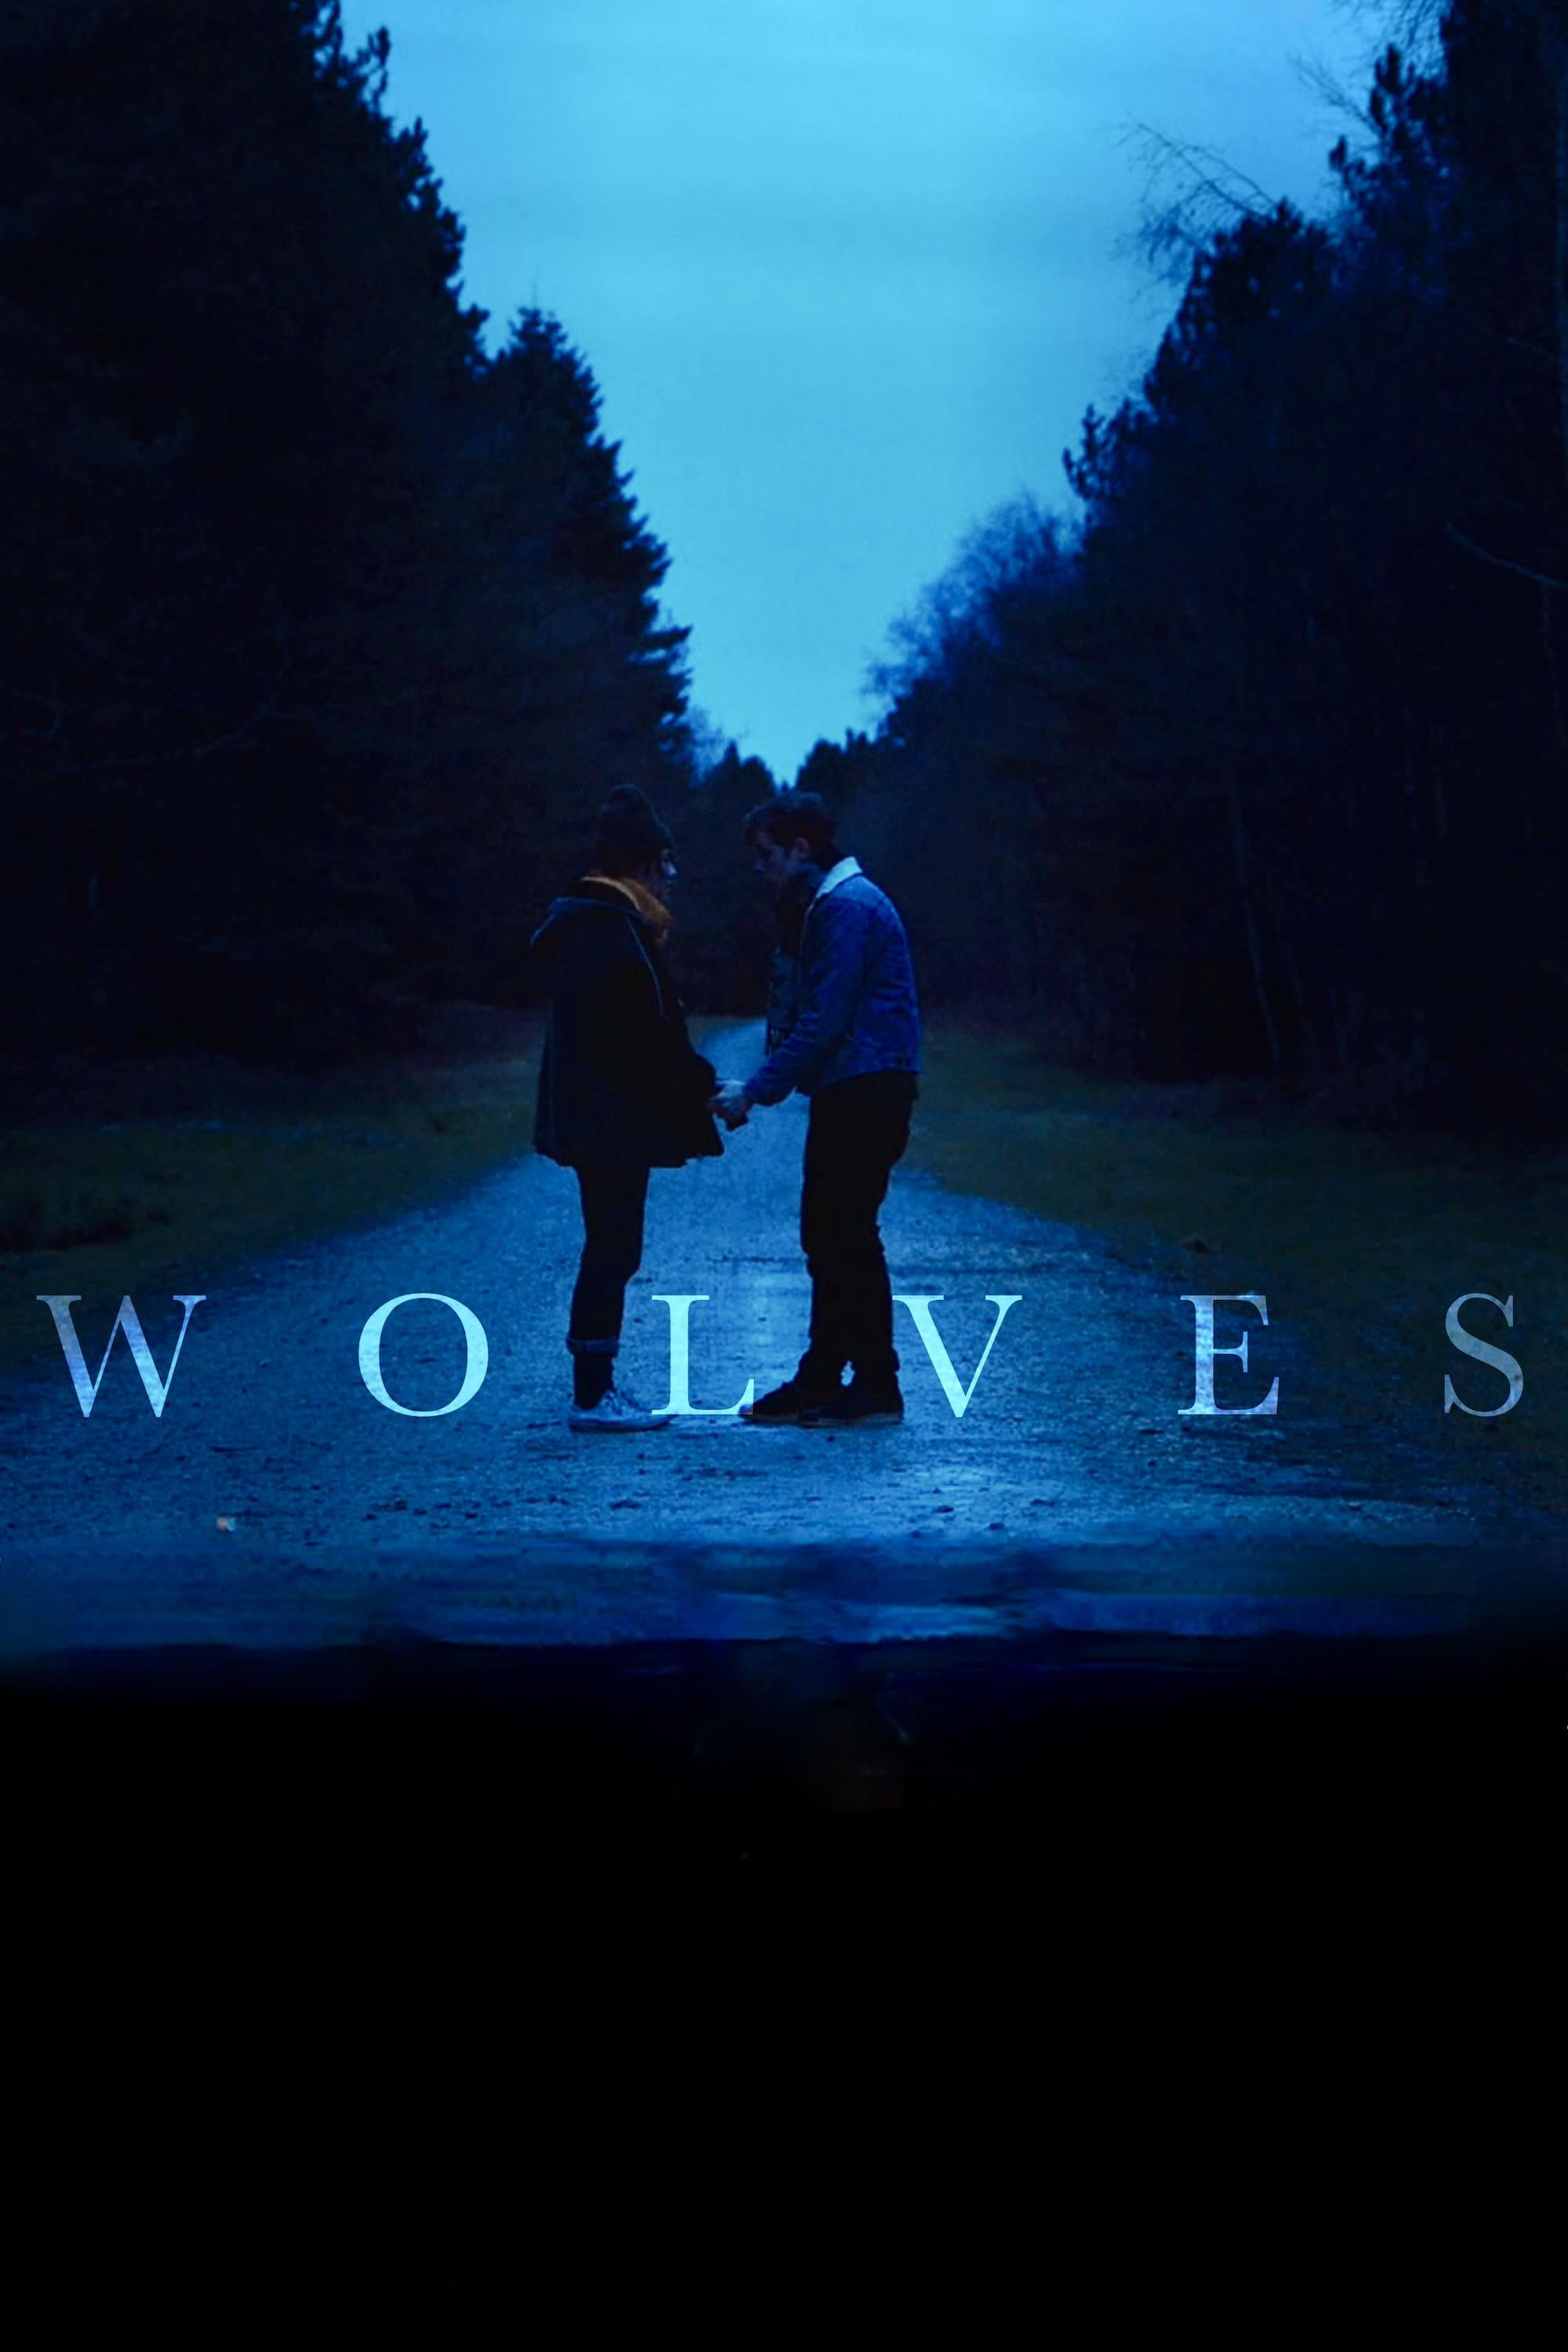 Wolves poster